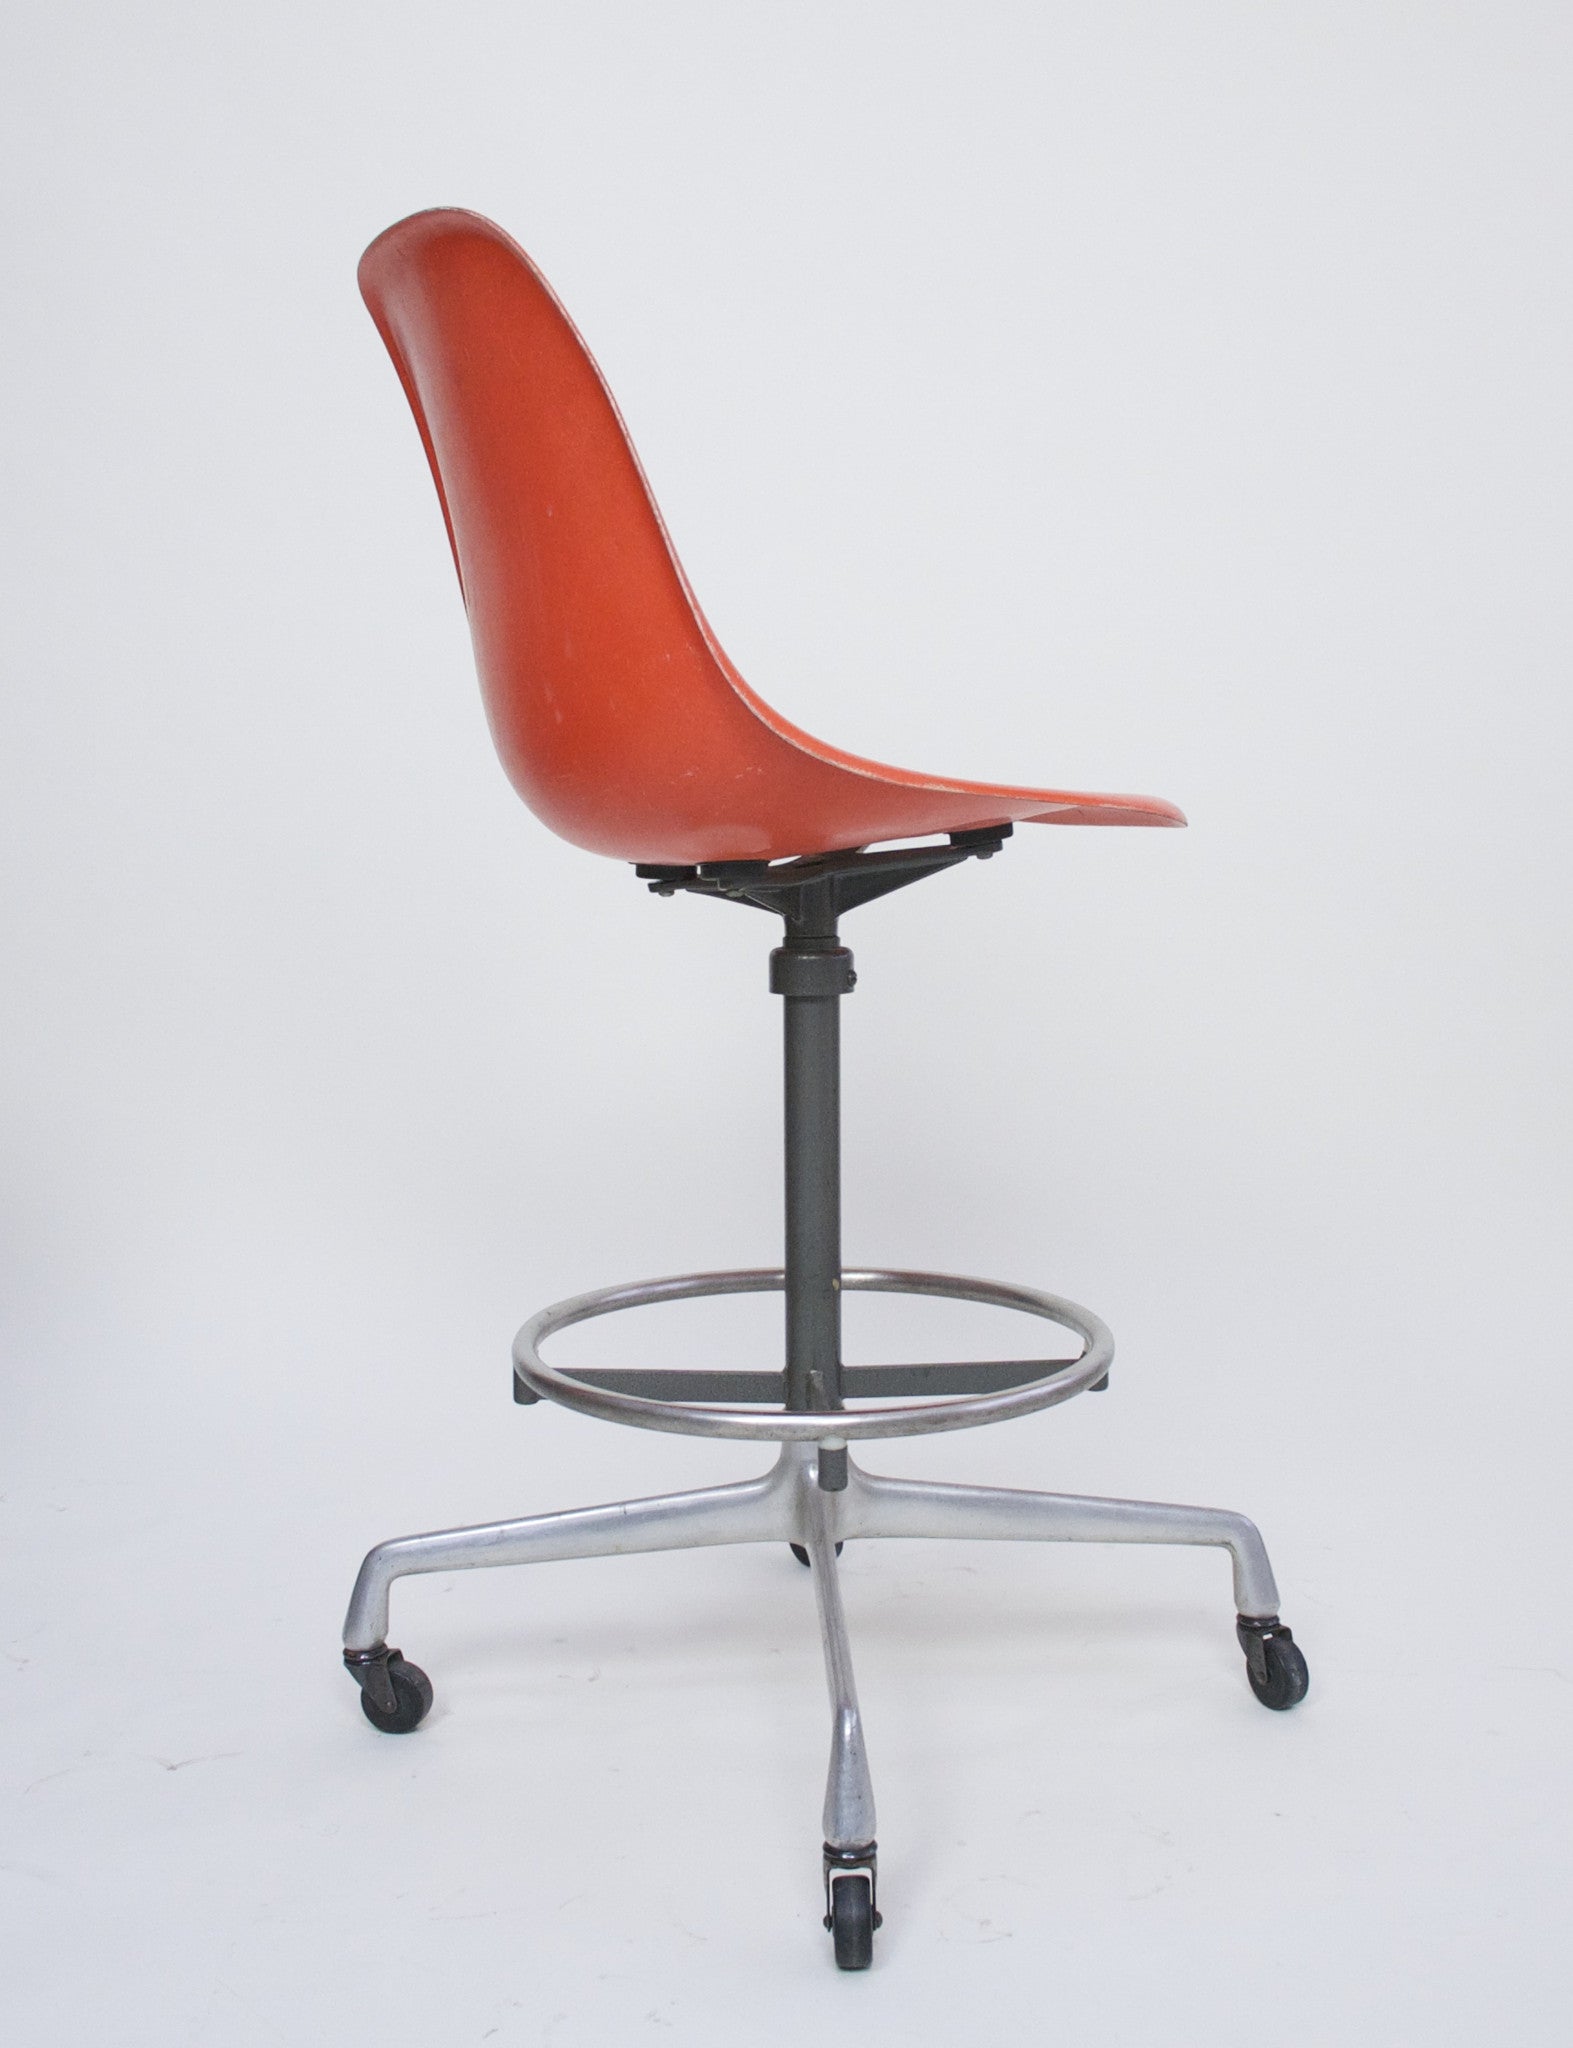 SOLD Herman Miller Eames Fiberglass Drafting Shell Chair 1 Available 1960's